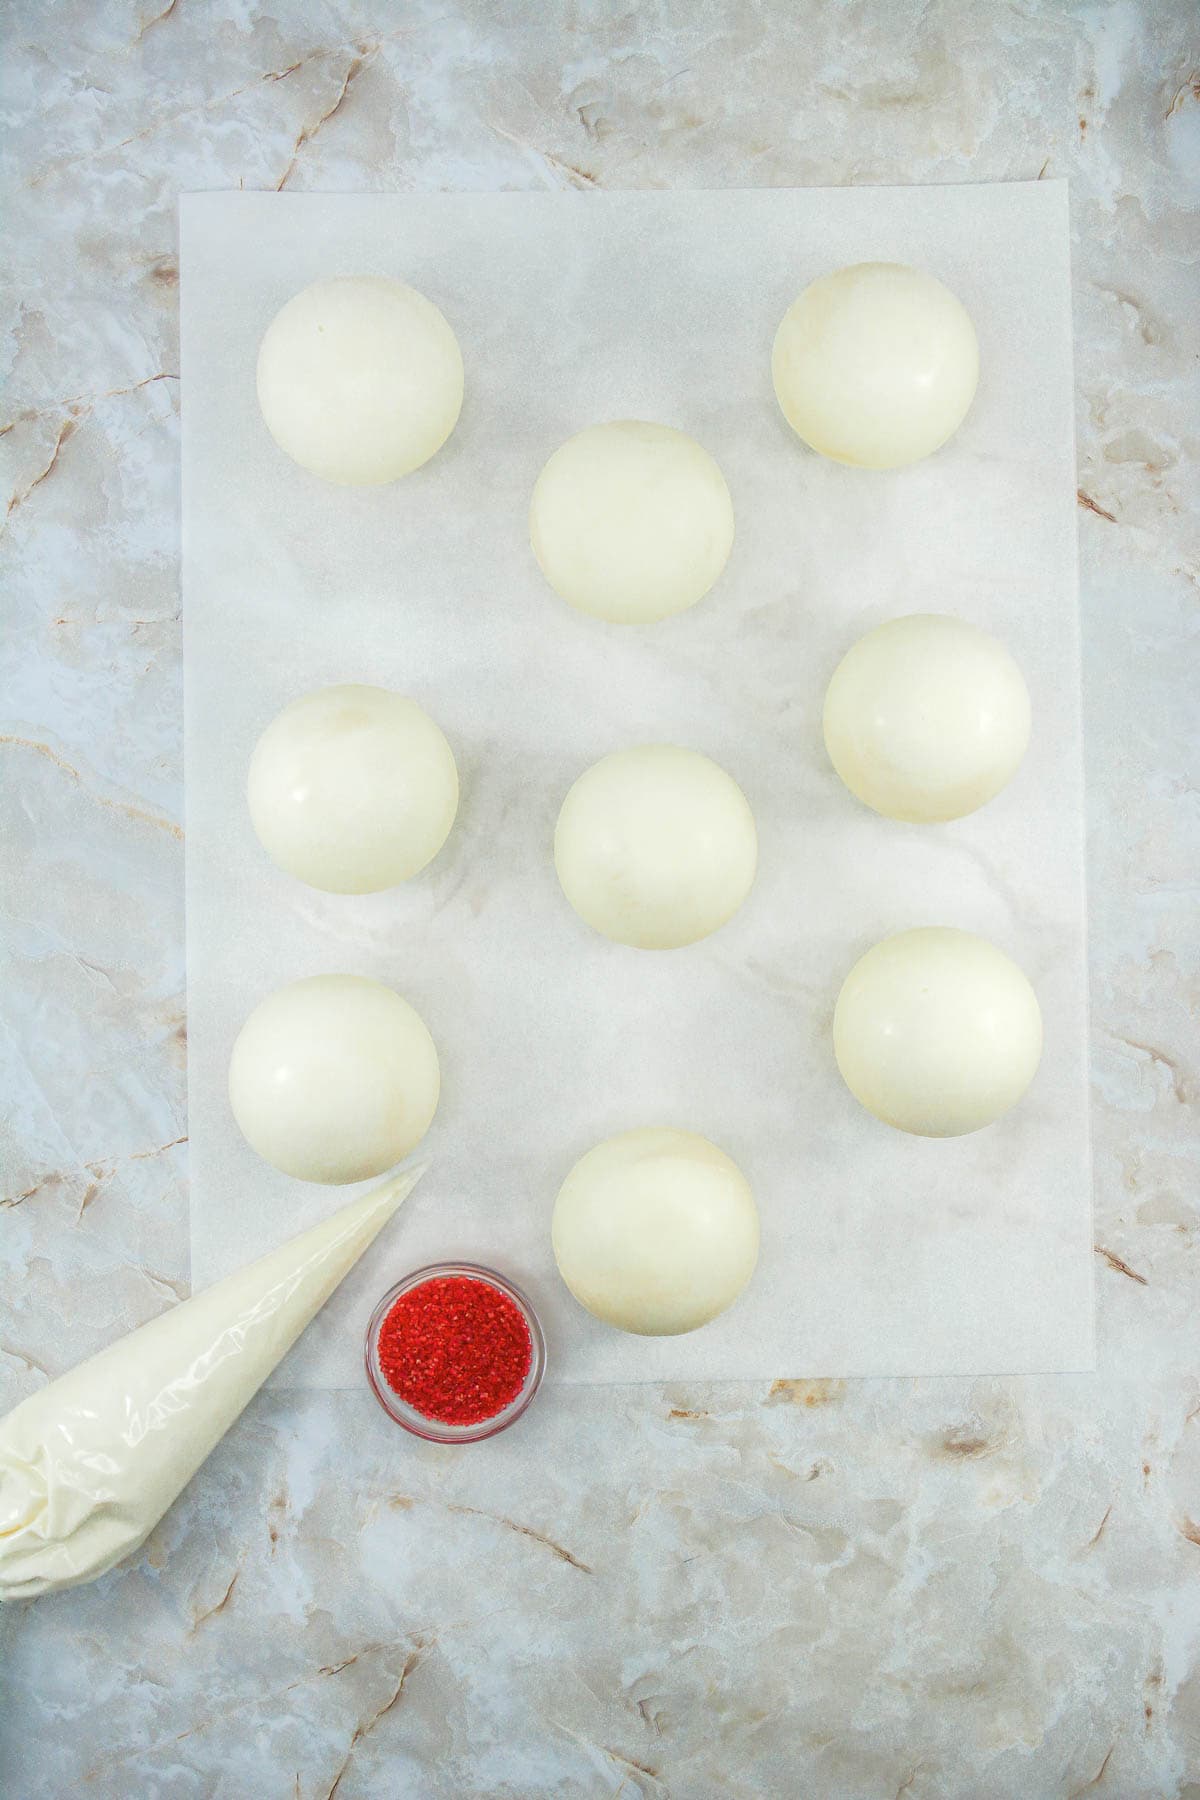 White chocolate cocoa bombs ready do be decorated.